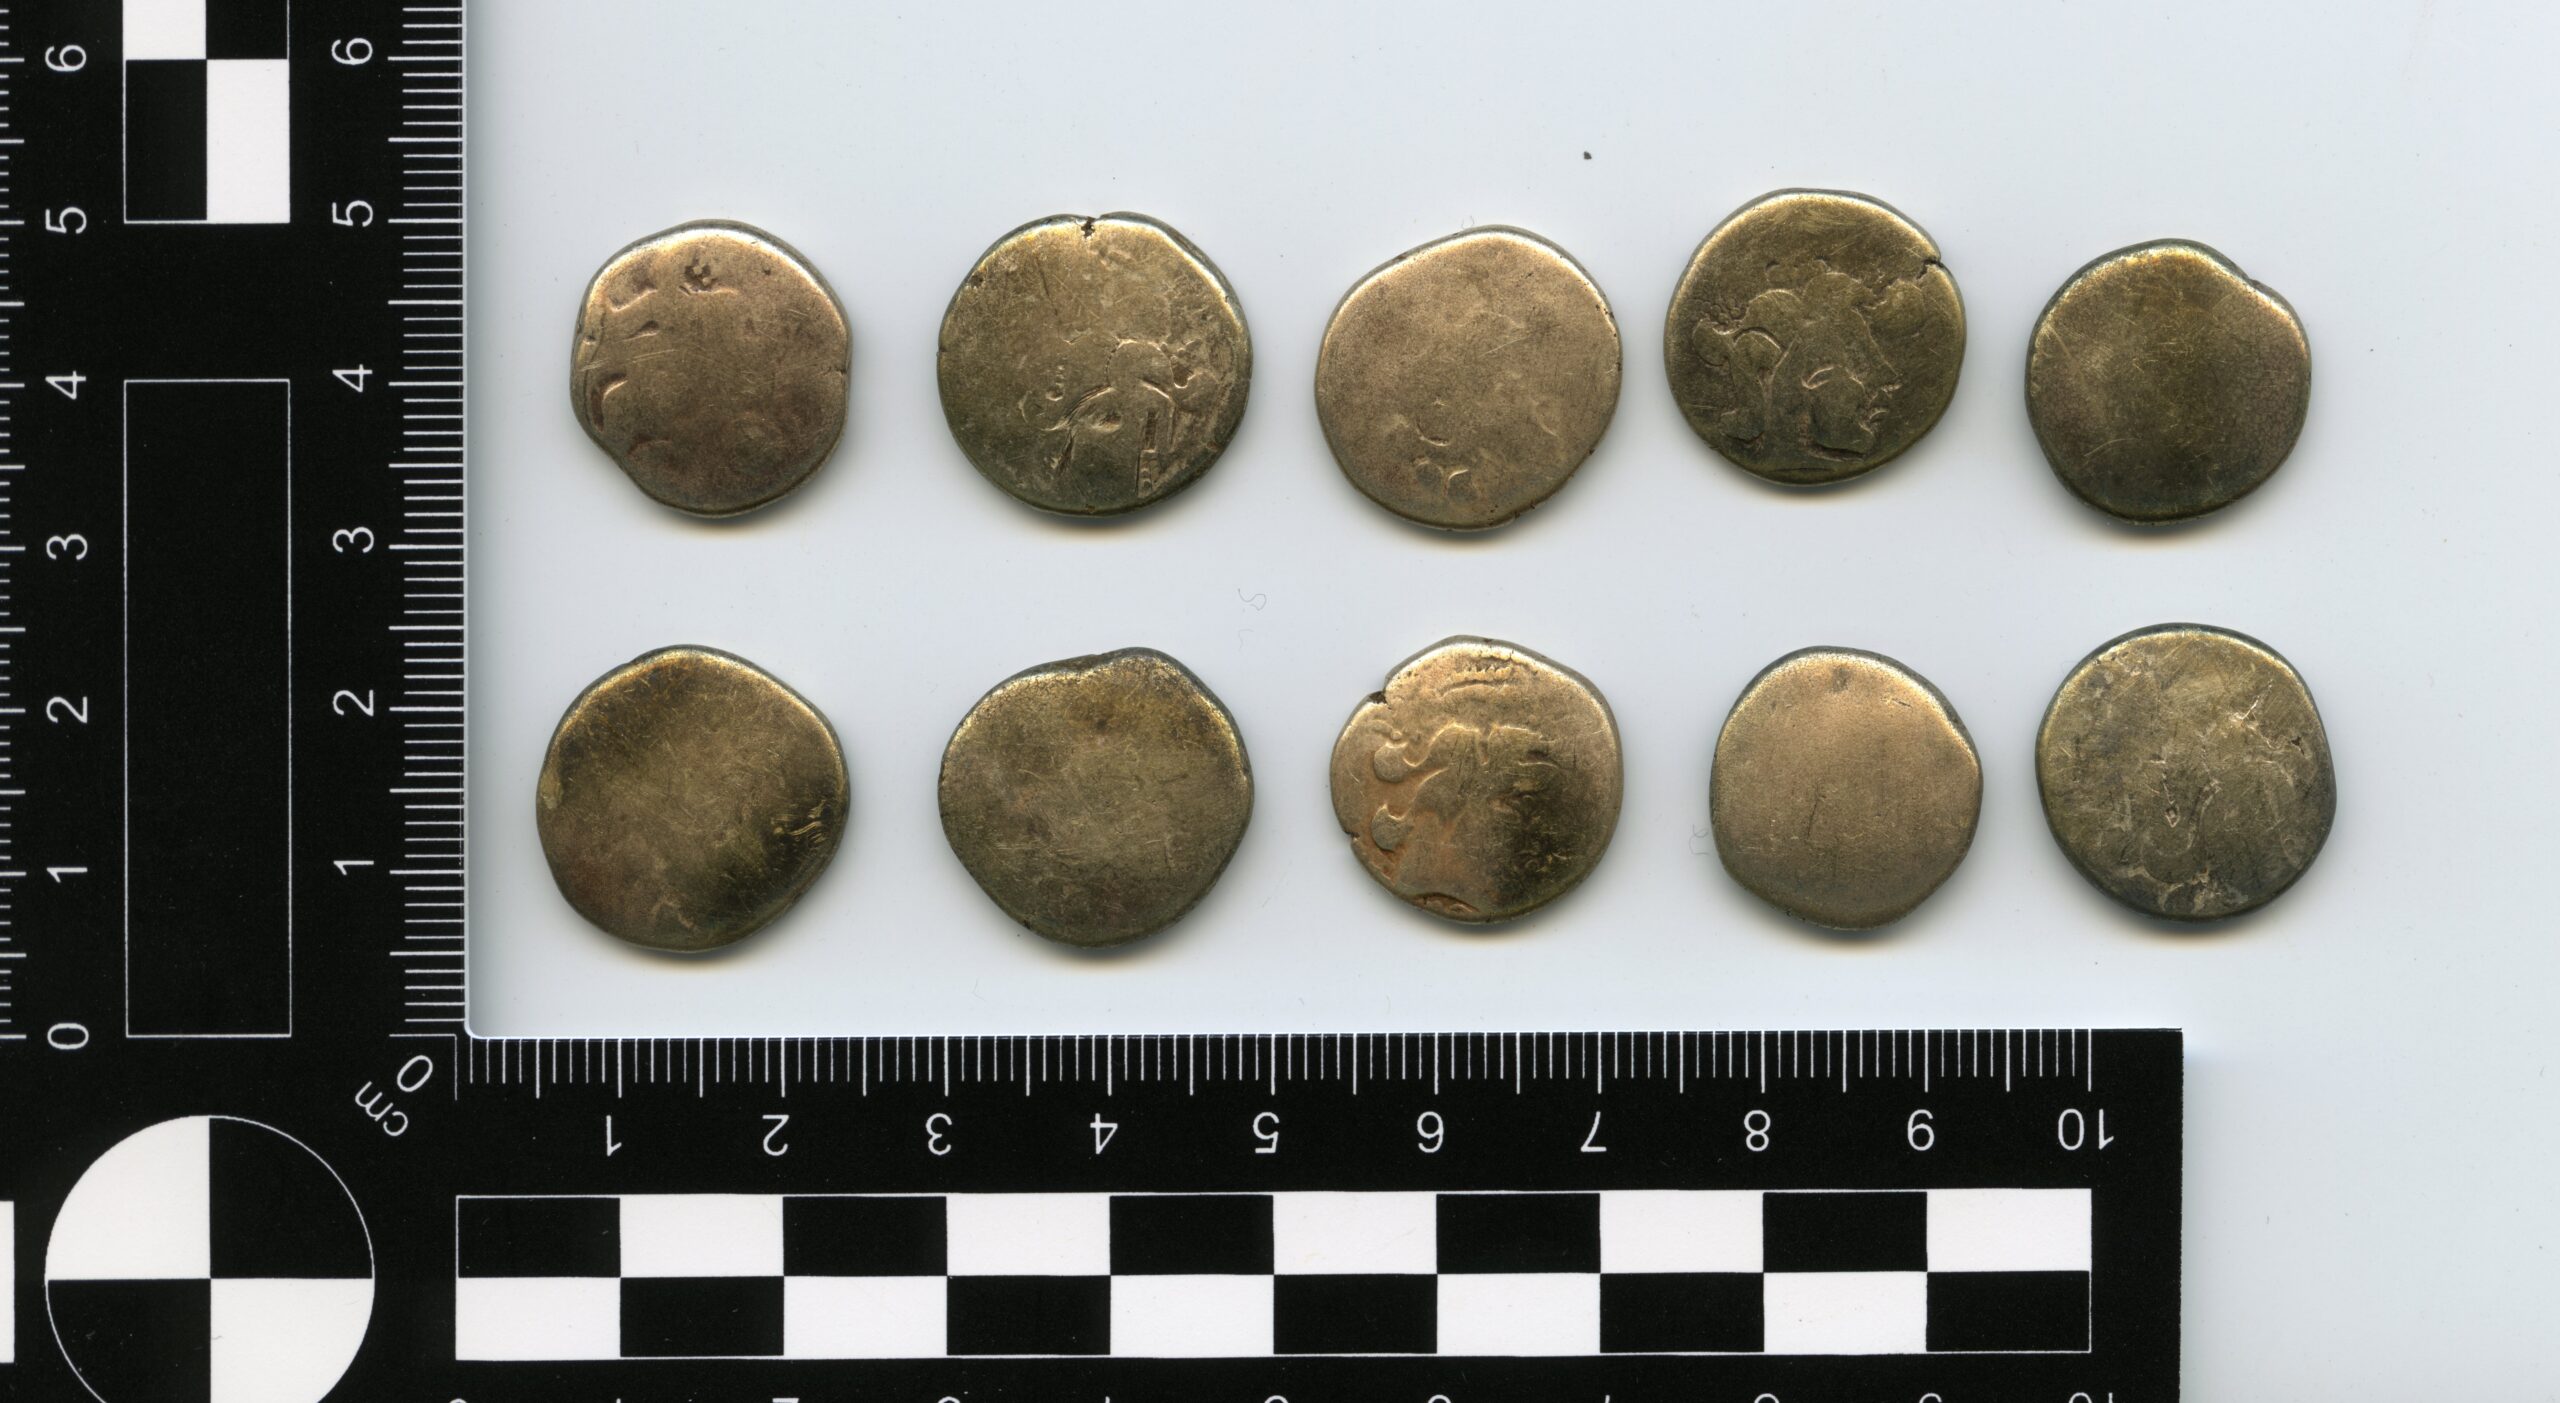 Selection of the Charlton Marshall Gold Stater HoardPAS/The British Museum, CC BY-NC-SA 4.0 DEED